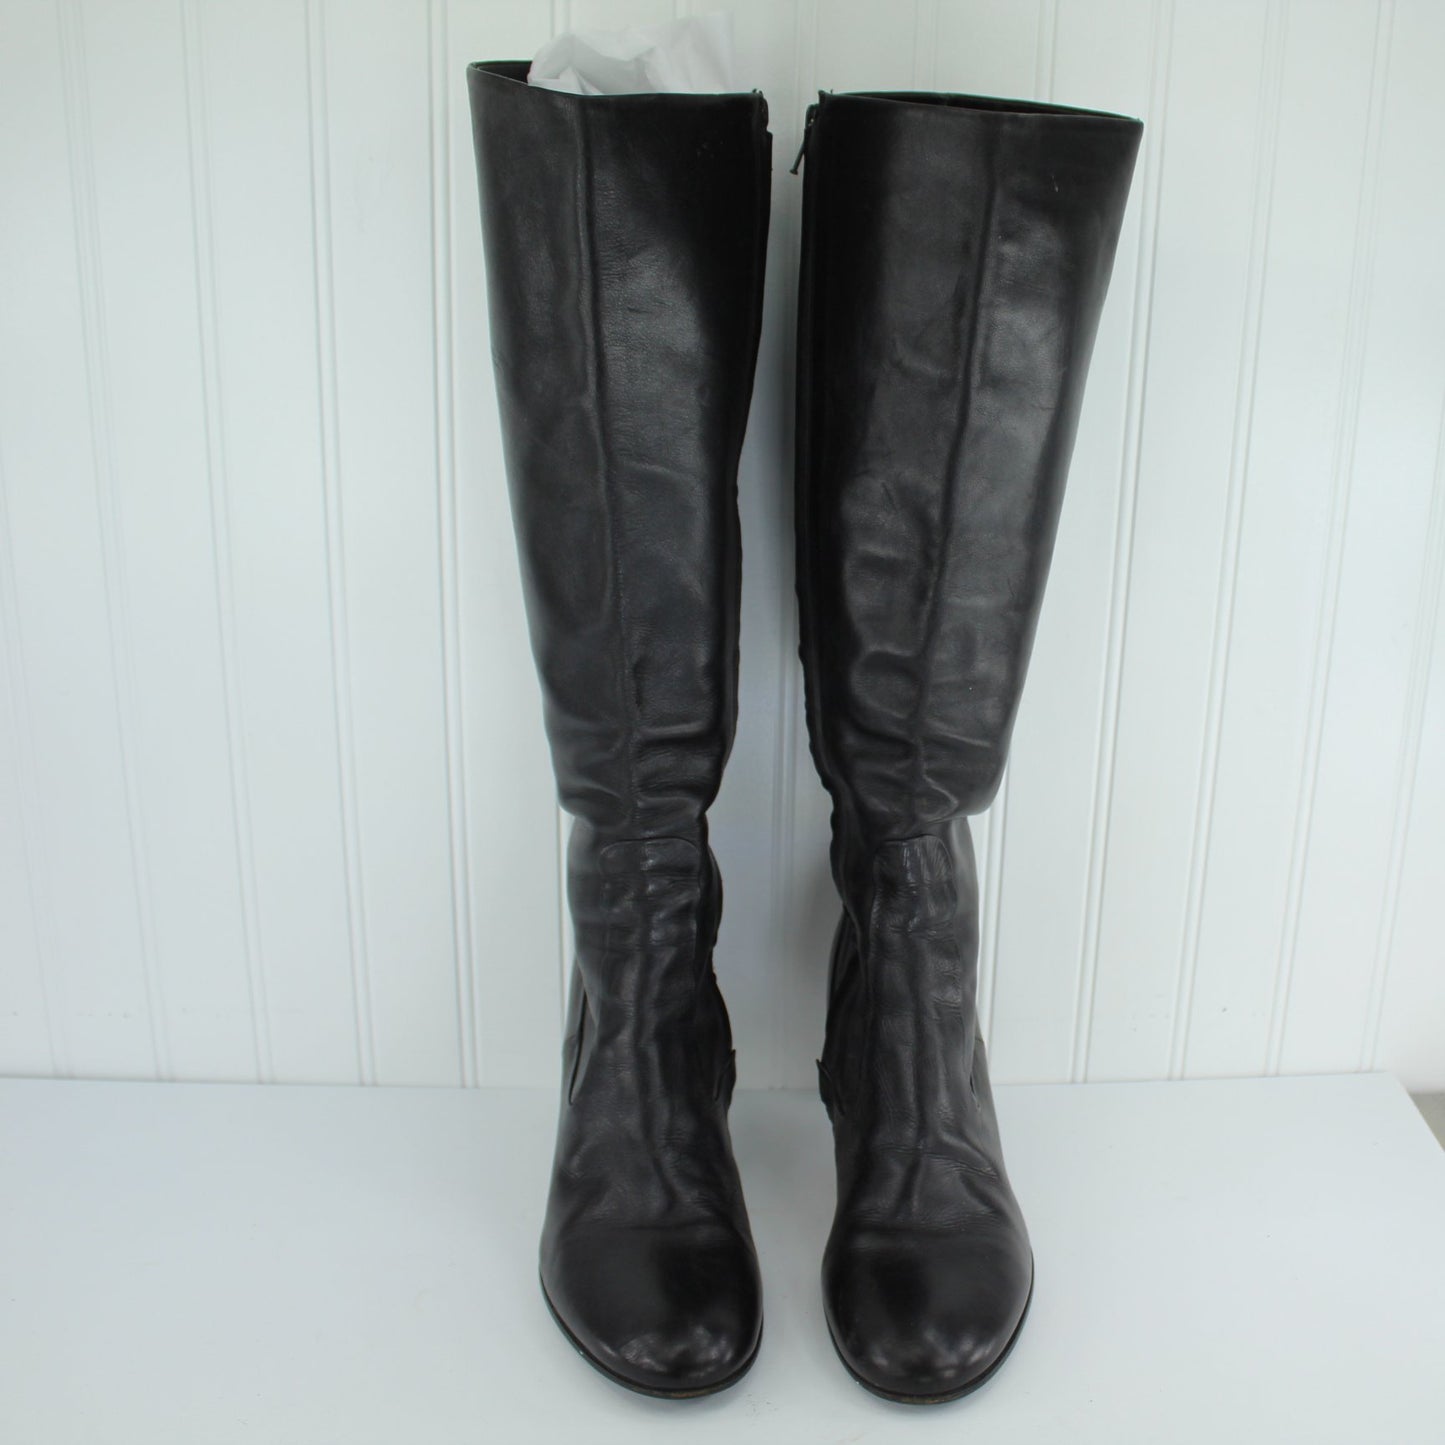 Black Leather Boots Women's 40 Italy Great Pre Owned 3" heel